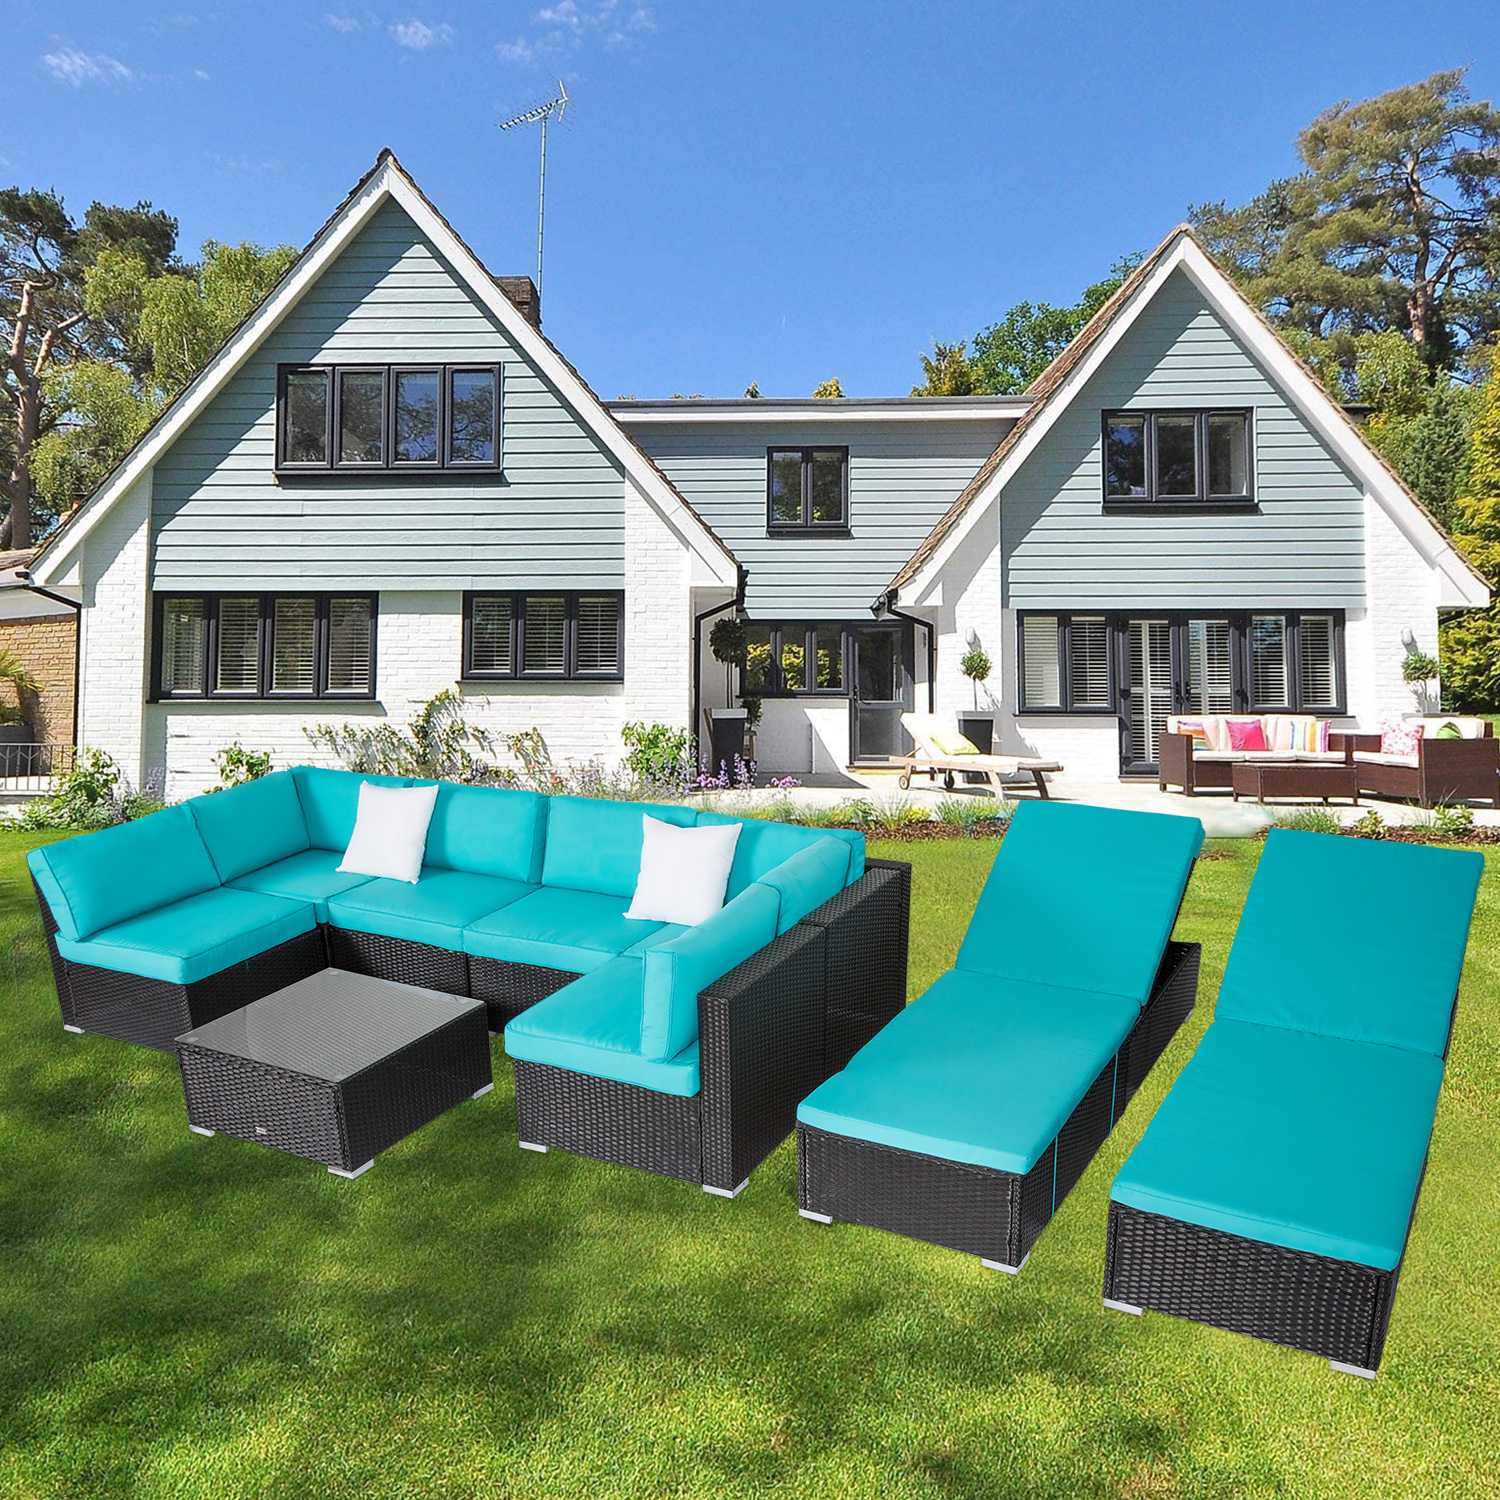 Kinbor 9pcs Outdoor Patio Furniture Sectional Pe Rattan Wicker Rattan Sofa Set with Chaise Lounge Chair, Turquoise - image 1 of 9